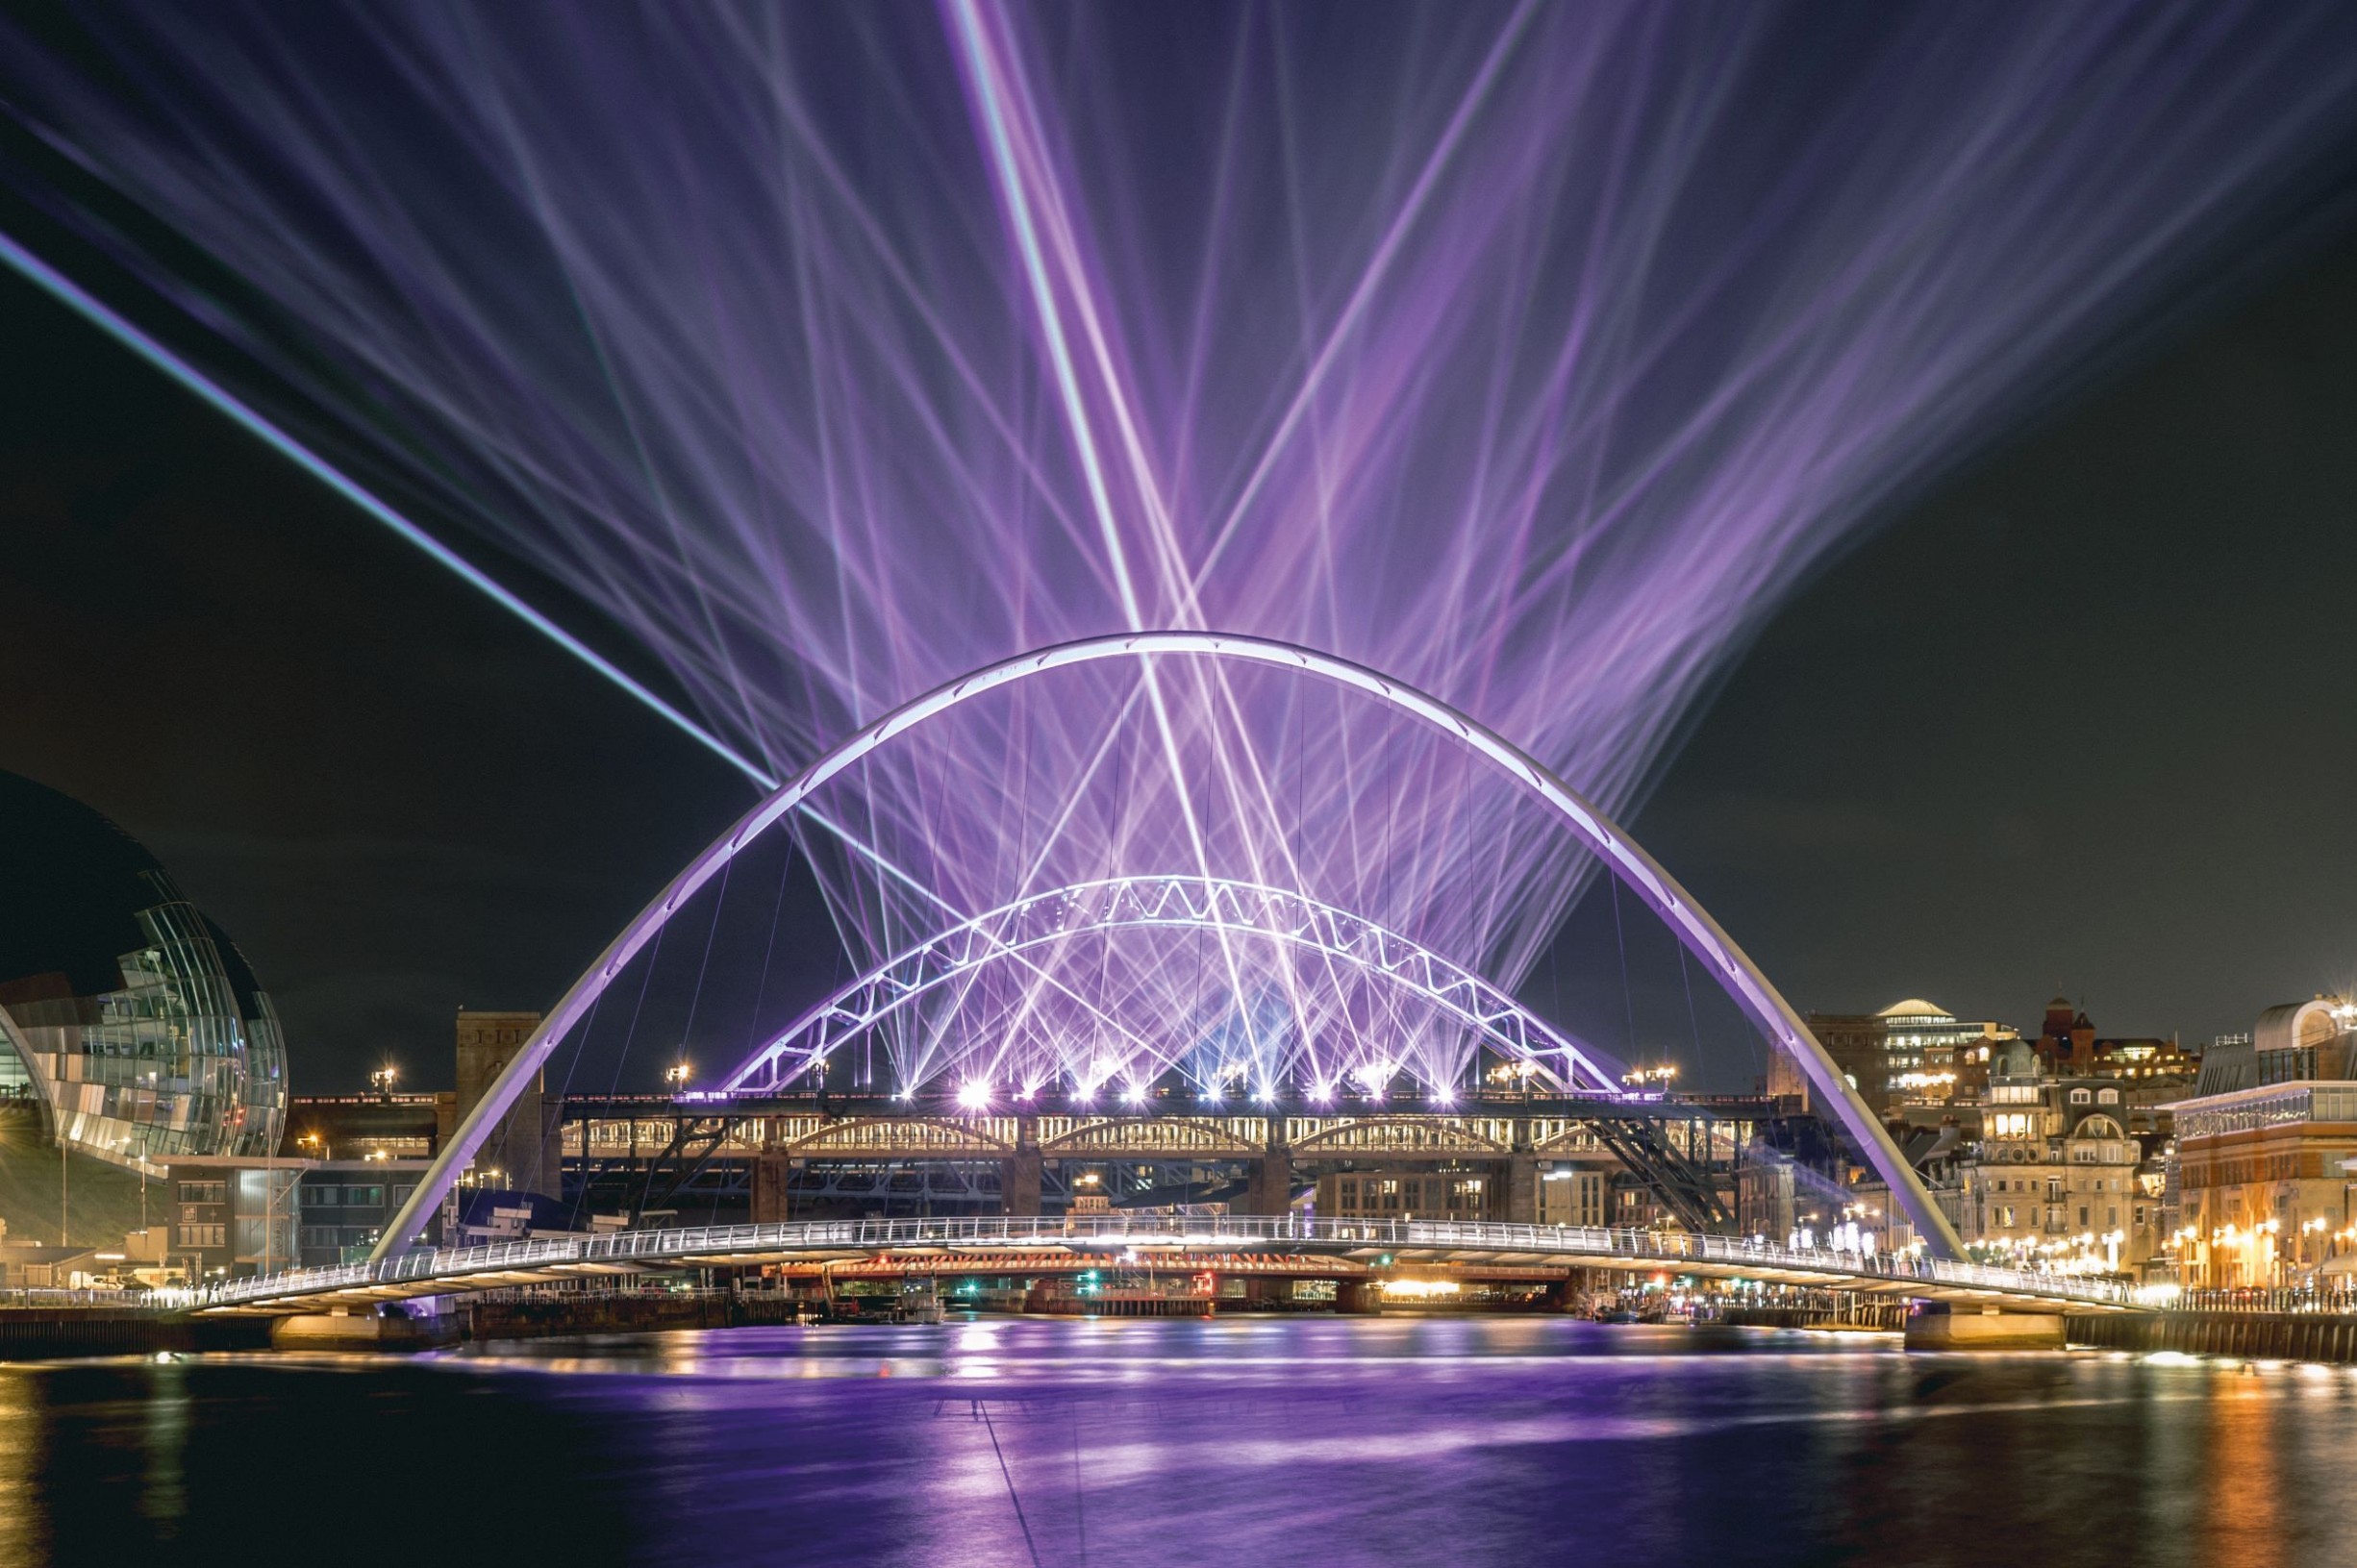 NE1 delivered Laser Light City in partnership with Newcastle City Council